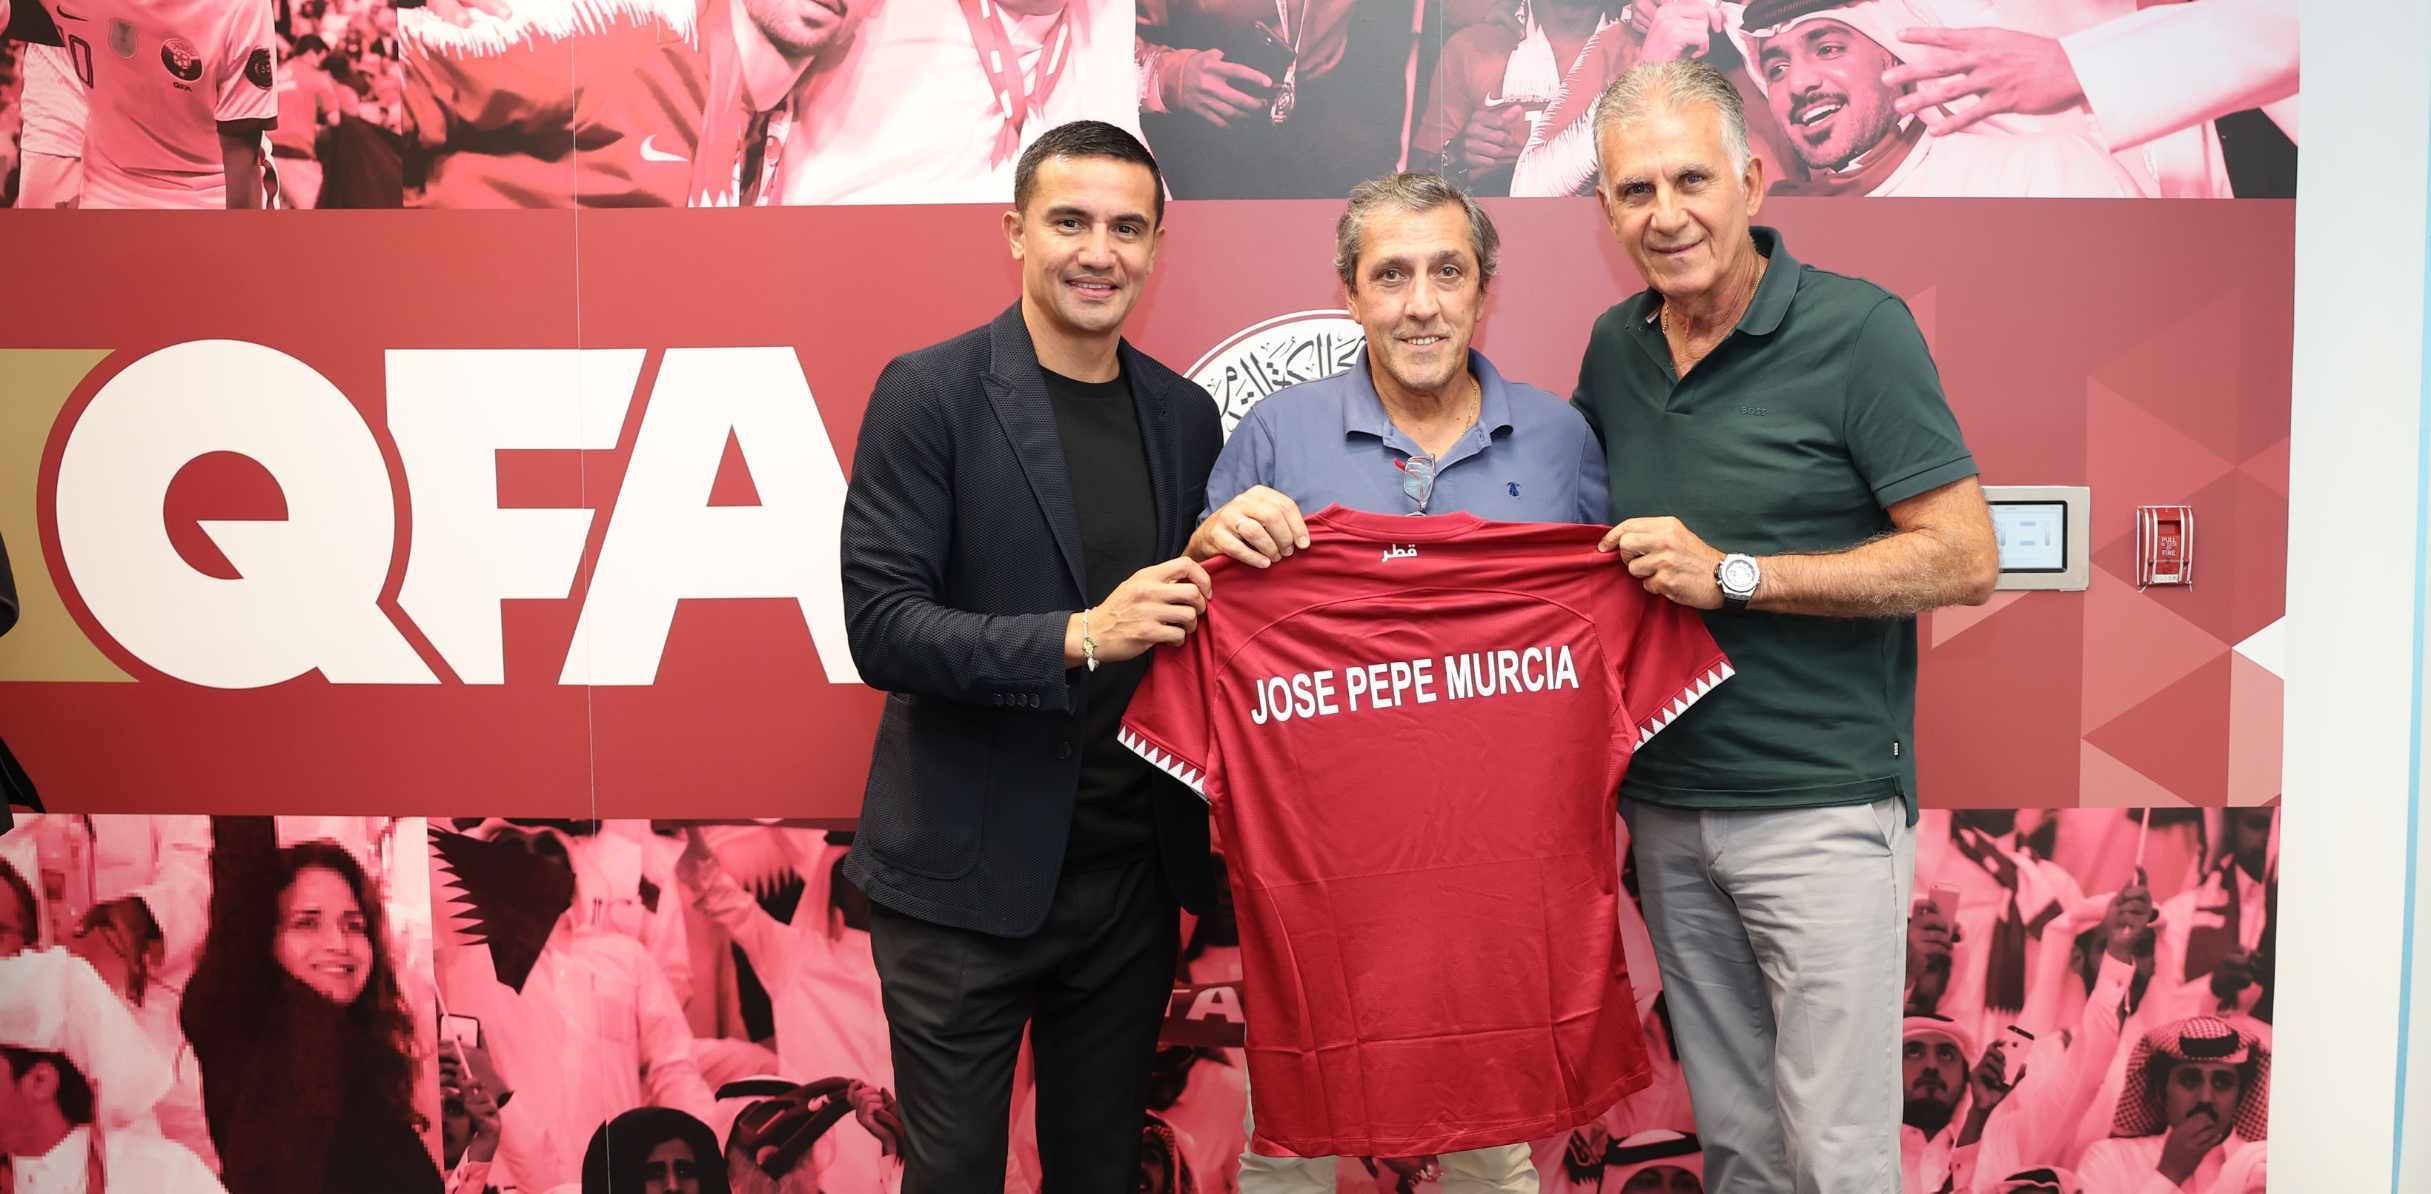 In the presence of our coach Pepe Murcia Queiroz meets with club coaches